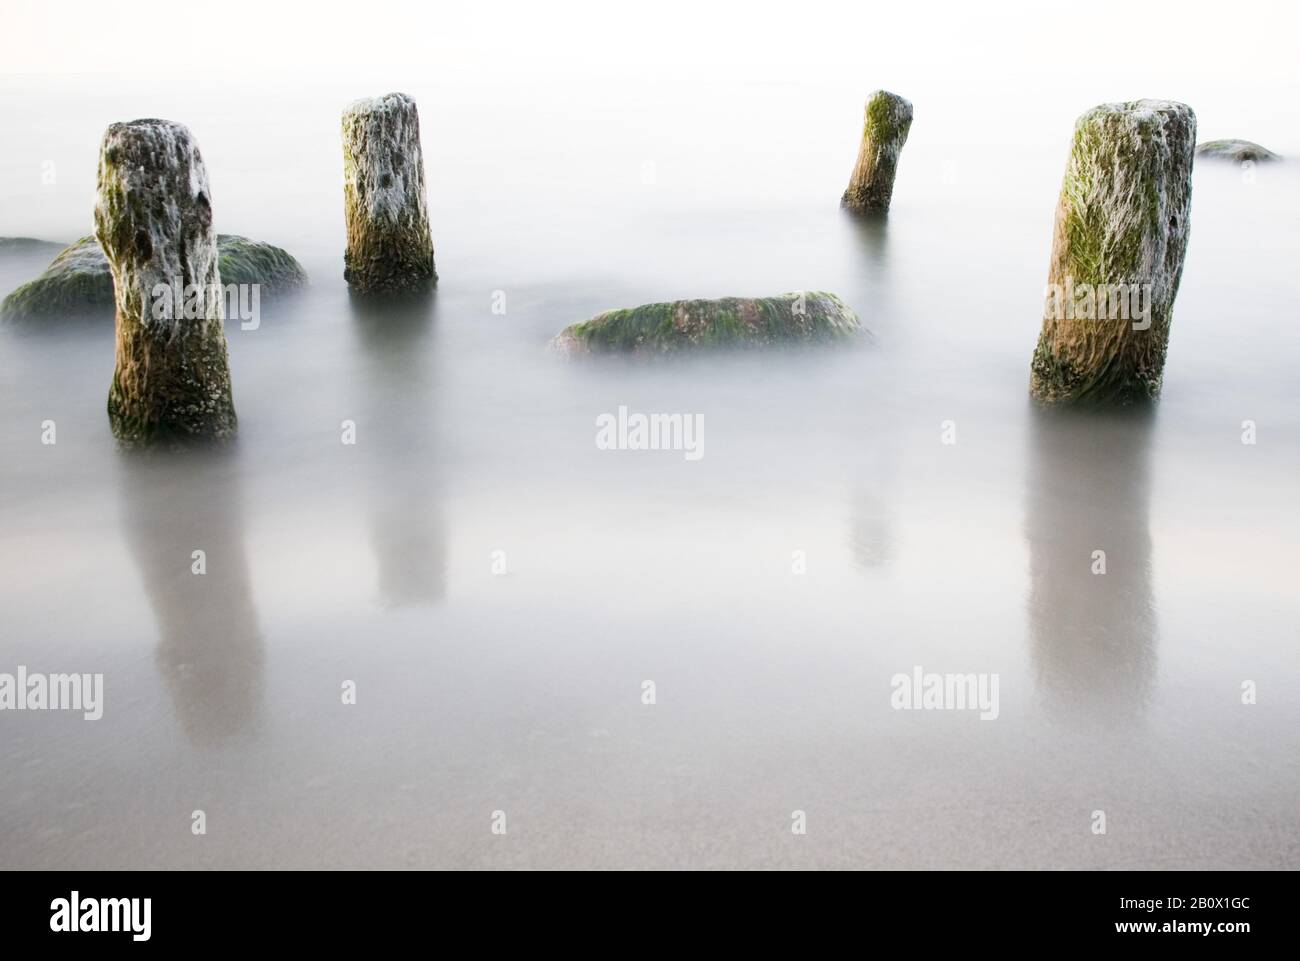 Old wooden groynes in the sea, Stock Photo